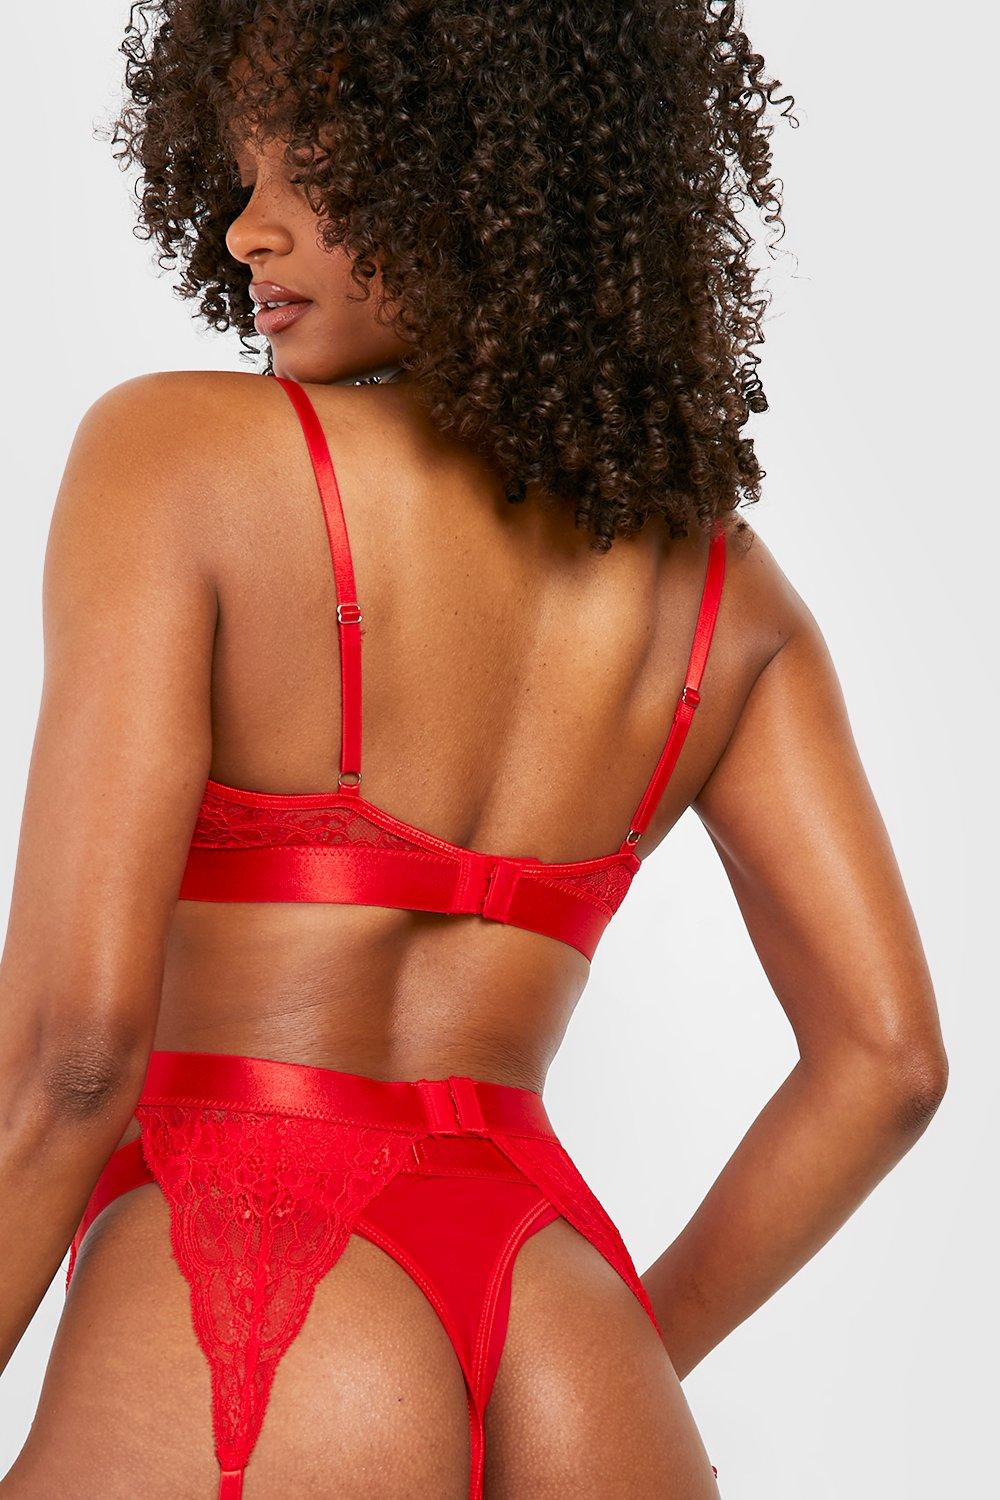 https://media.boohoo.com/i/boohoo/gzz47168_red_xl_1/female-red-crotchless-lace-bra-thong-and-suspender-set